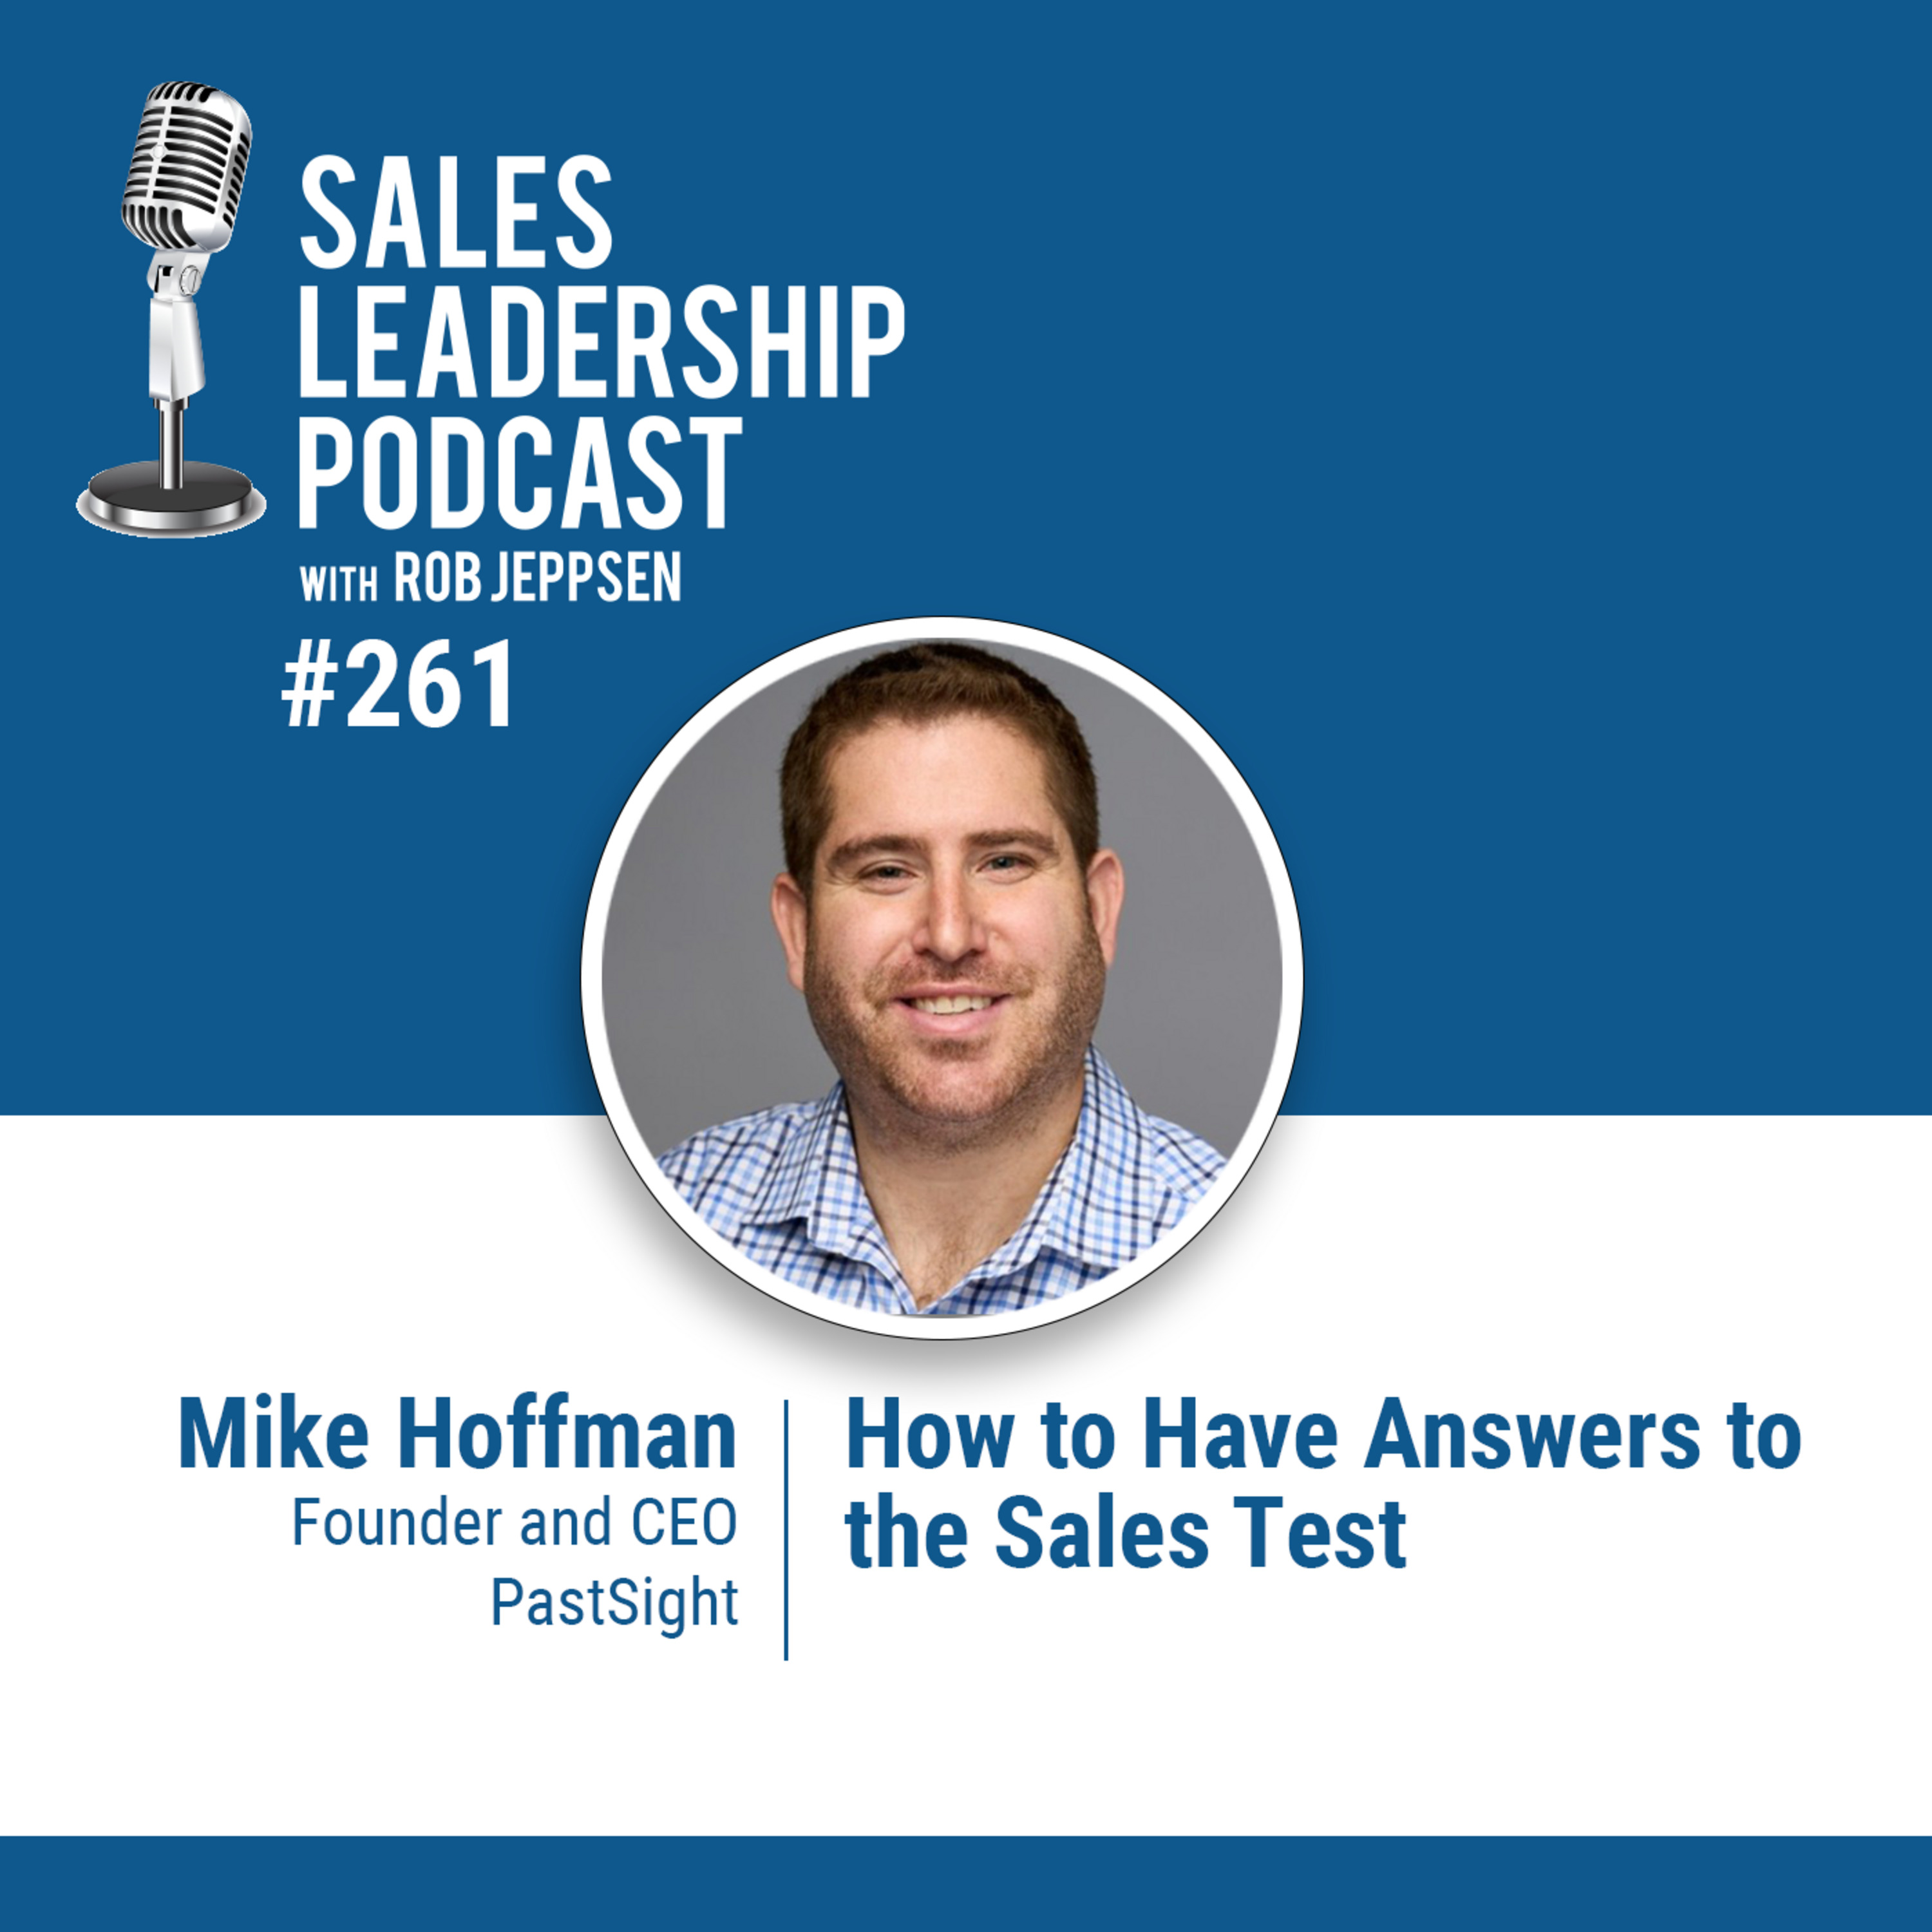 Episode 261: Mike Hoffman, Founder and CEO of PastSight: How to Have the Answers to the Sales Test